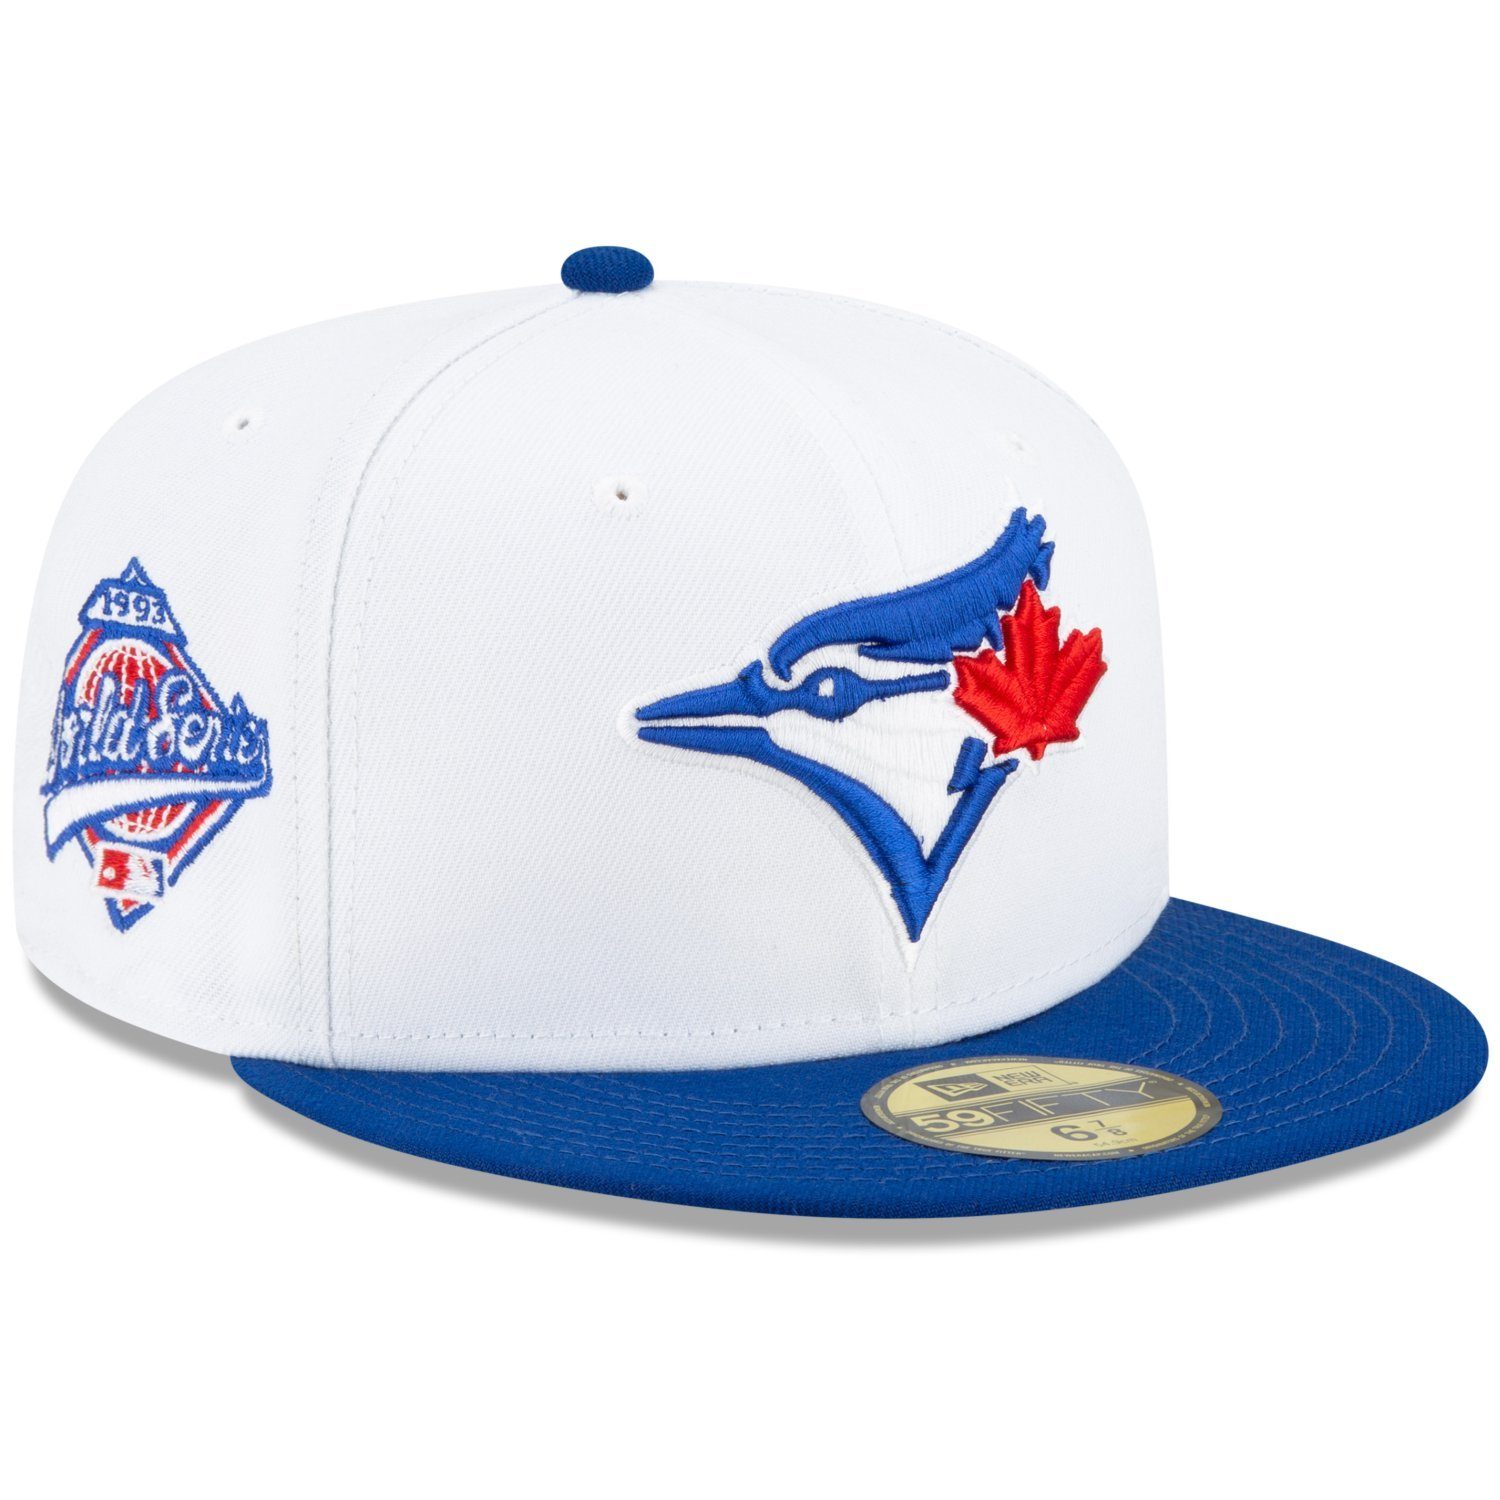 New Era Fitted Cap 59Fifty WORLD SERIES 1993 Toronto Jays